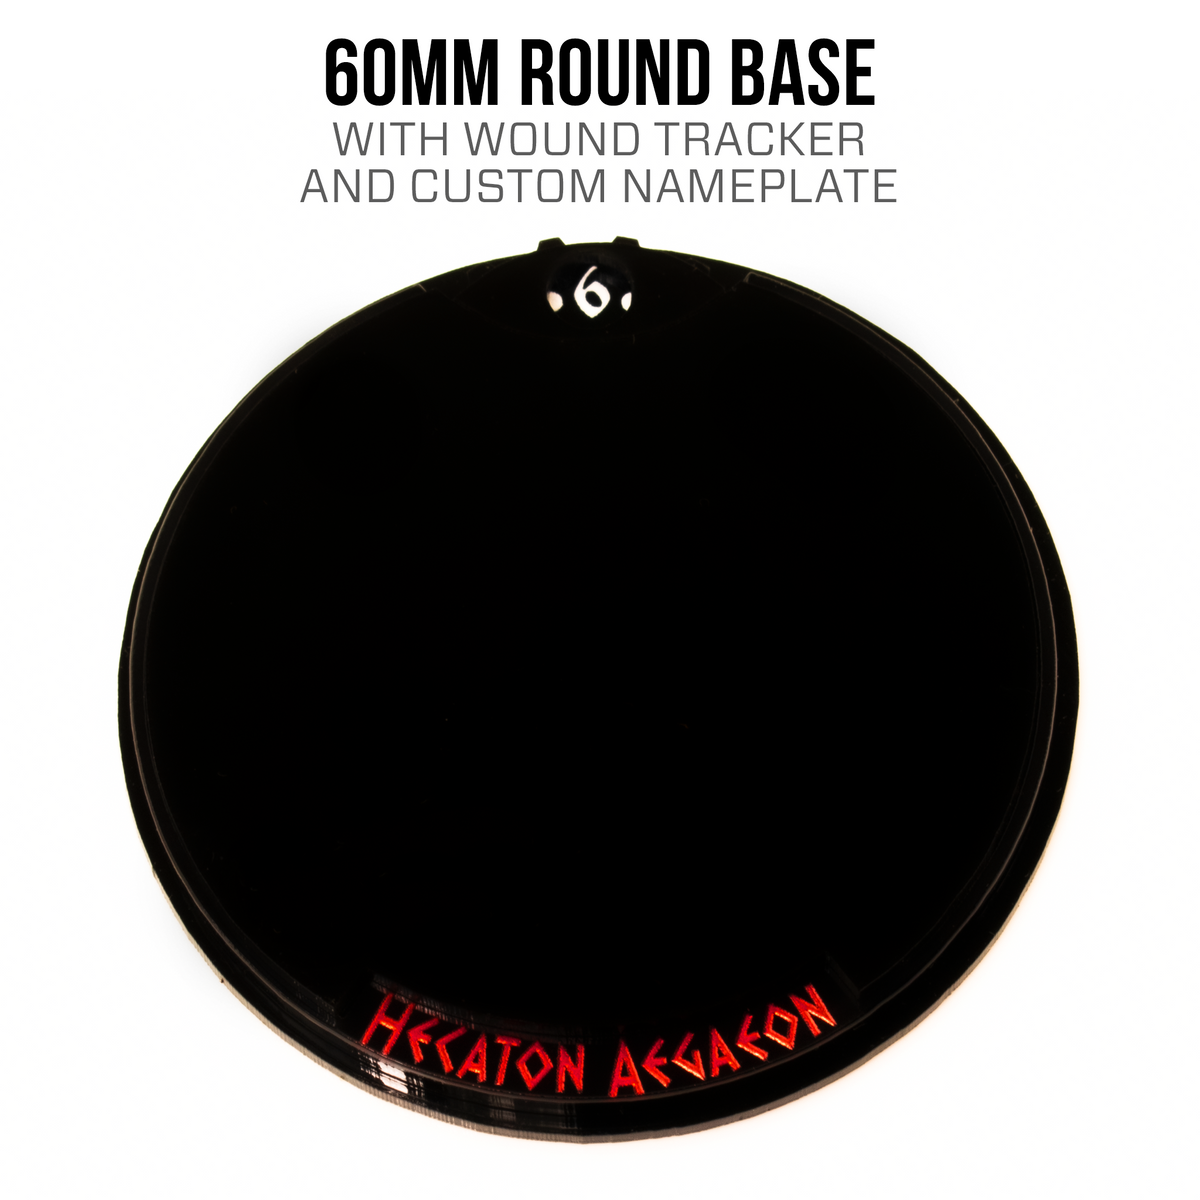 60mm Round Base with Wound Tracker